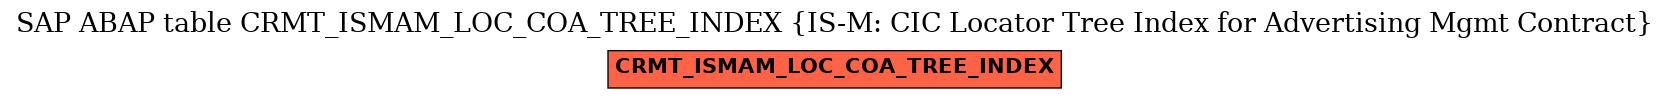 E-R Diagram for table CRMT_ISMAM_LOC_COA_TREE_INDEX (IS-M: CIC Locator Tree Index for Advertising Mgmt Contract)